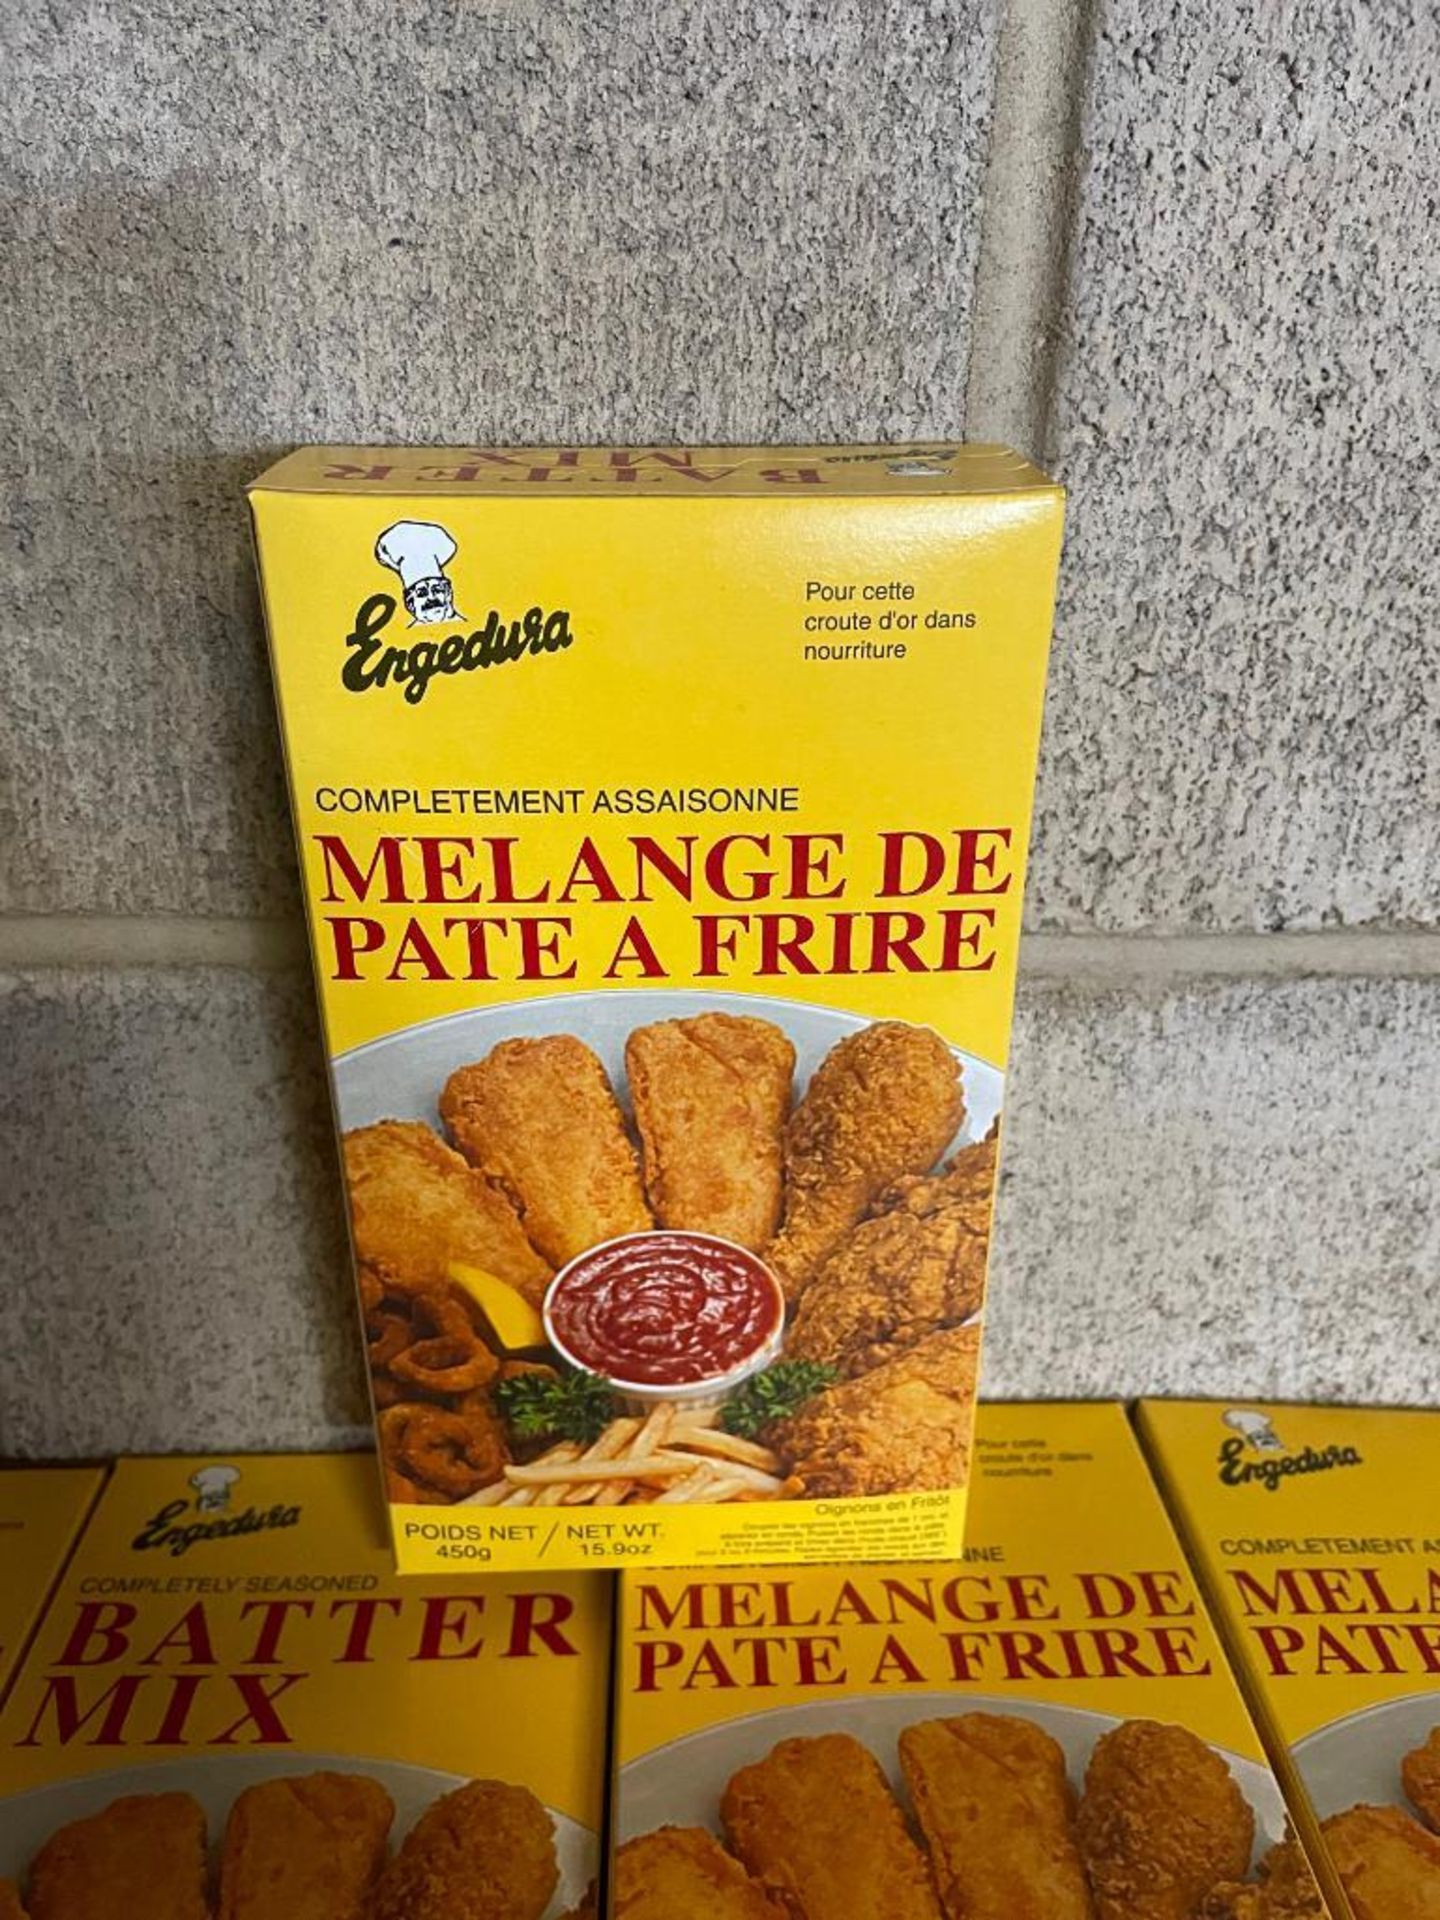 (11) CASES OF ENGEDURA COMPLETELY SEASONED BATTER MIX, 12/450G BOXES PER CASE - Image 2 of 2